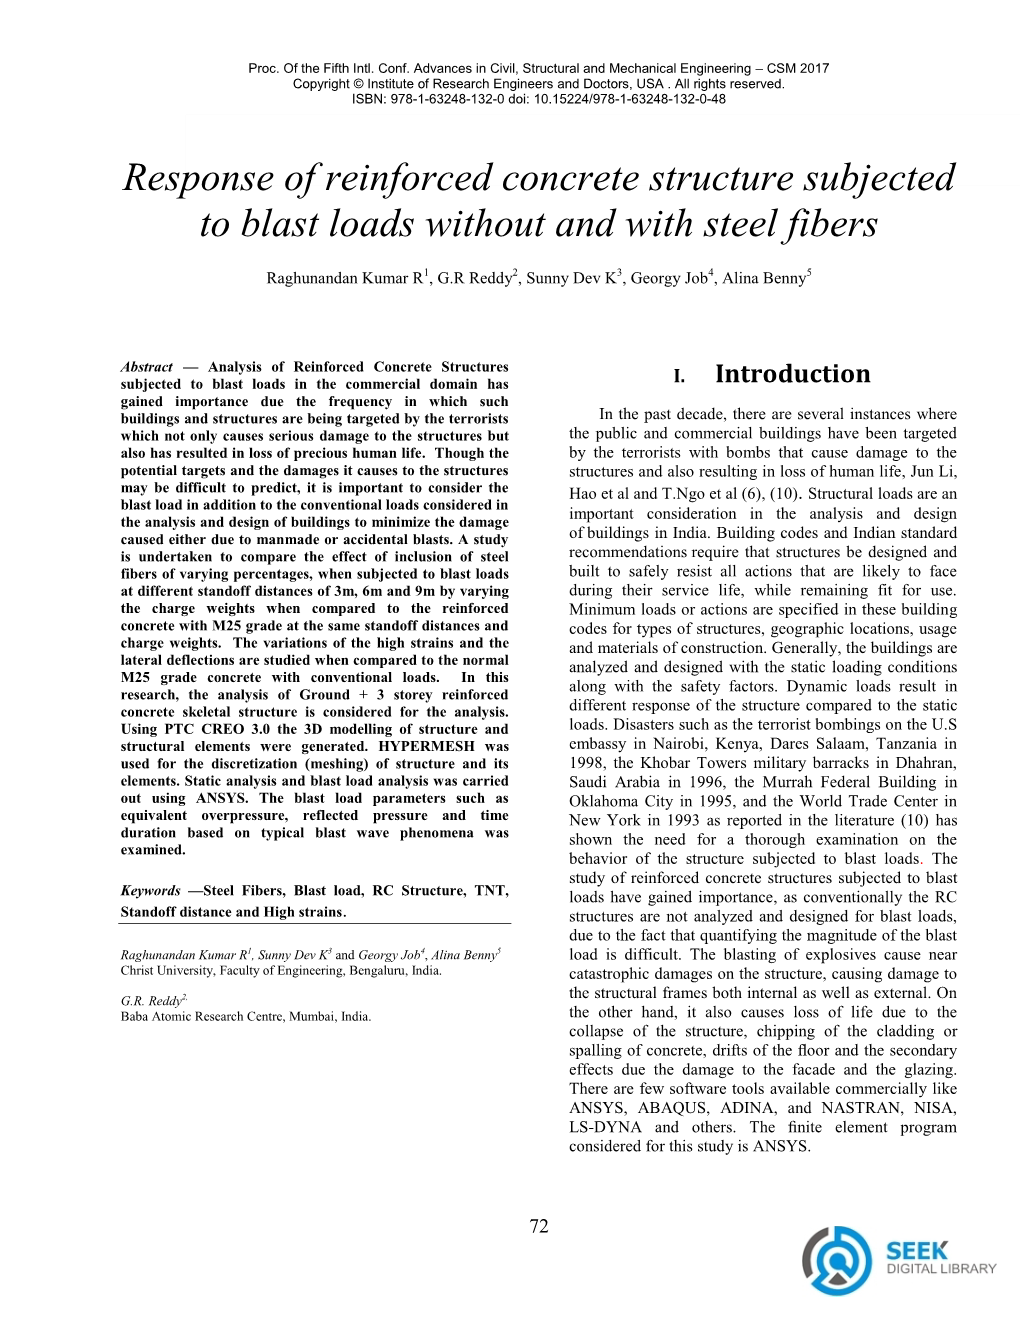 Response of Reinforced Concrete Structure Subjected to Blast Loads Without and with Steel Fibers